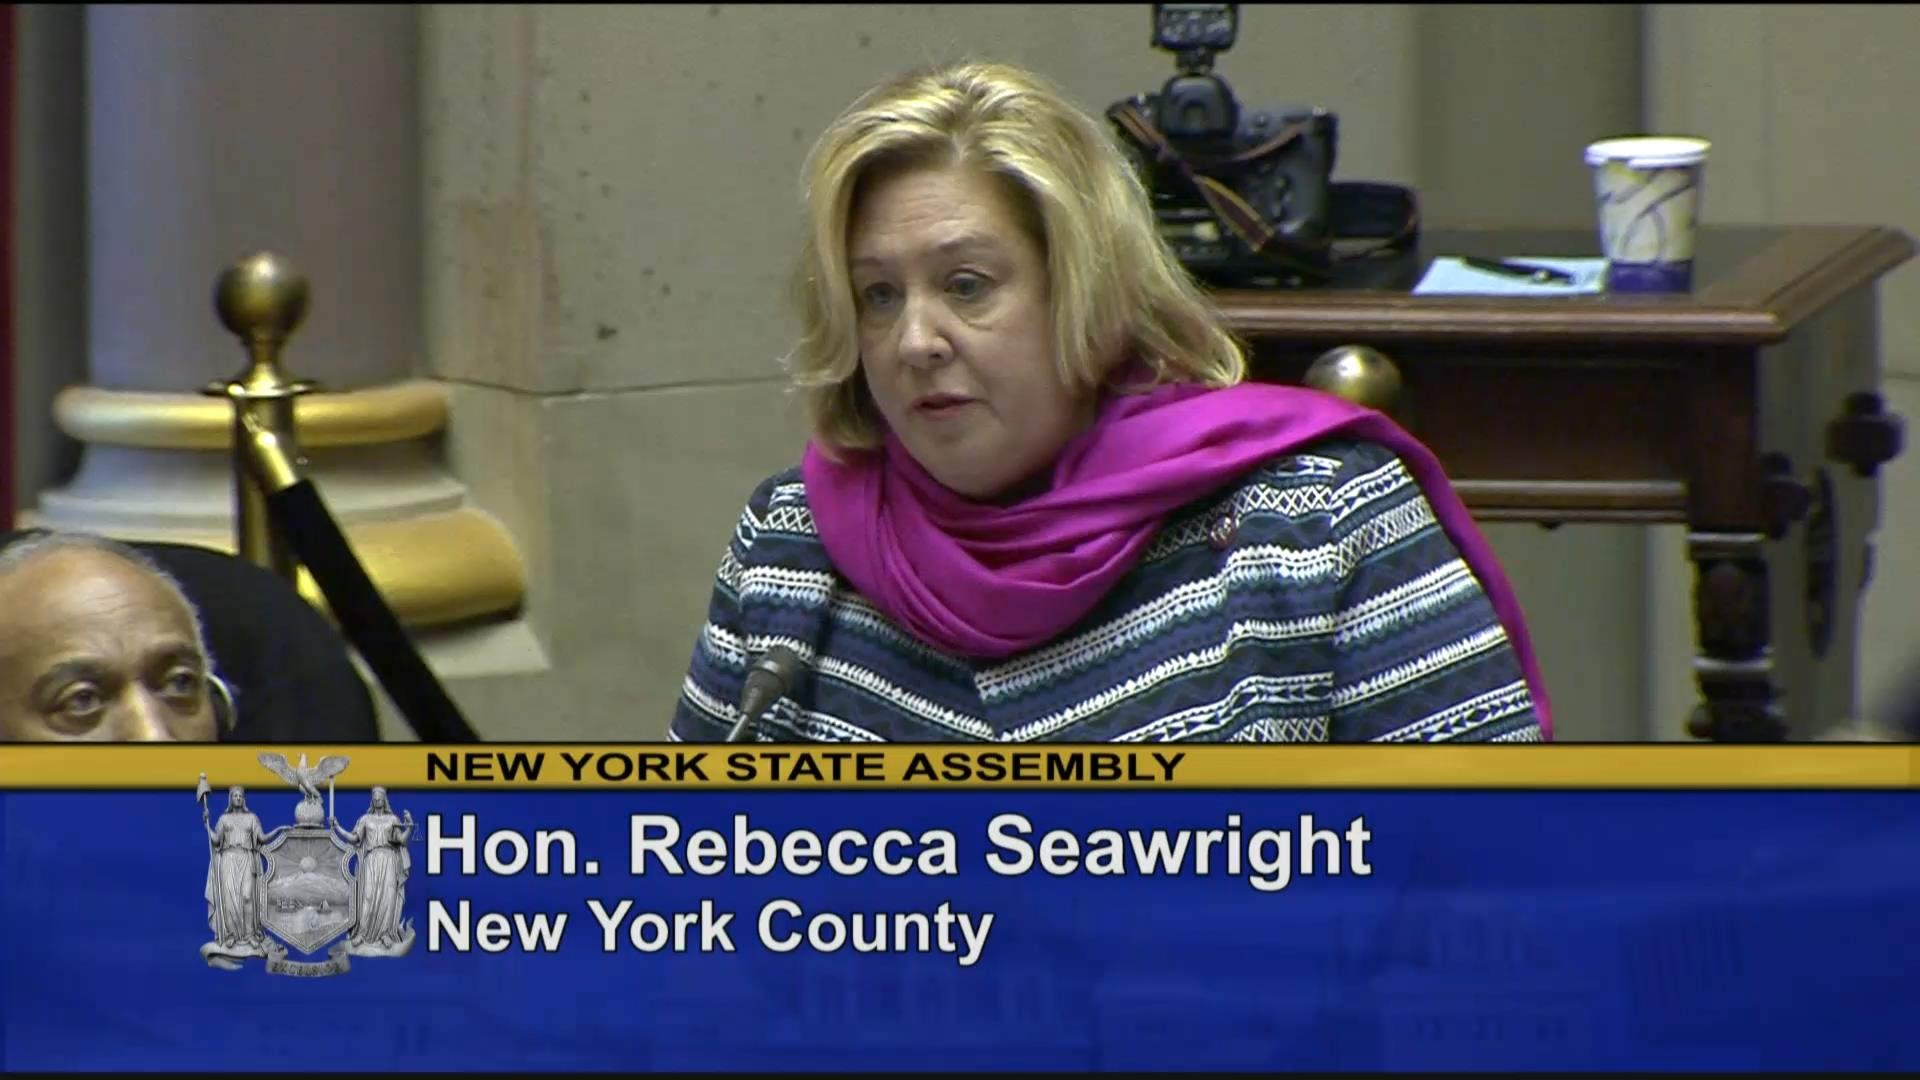 Seawright Works to Ensure Equal Rights for Women in NYS